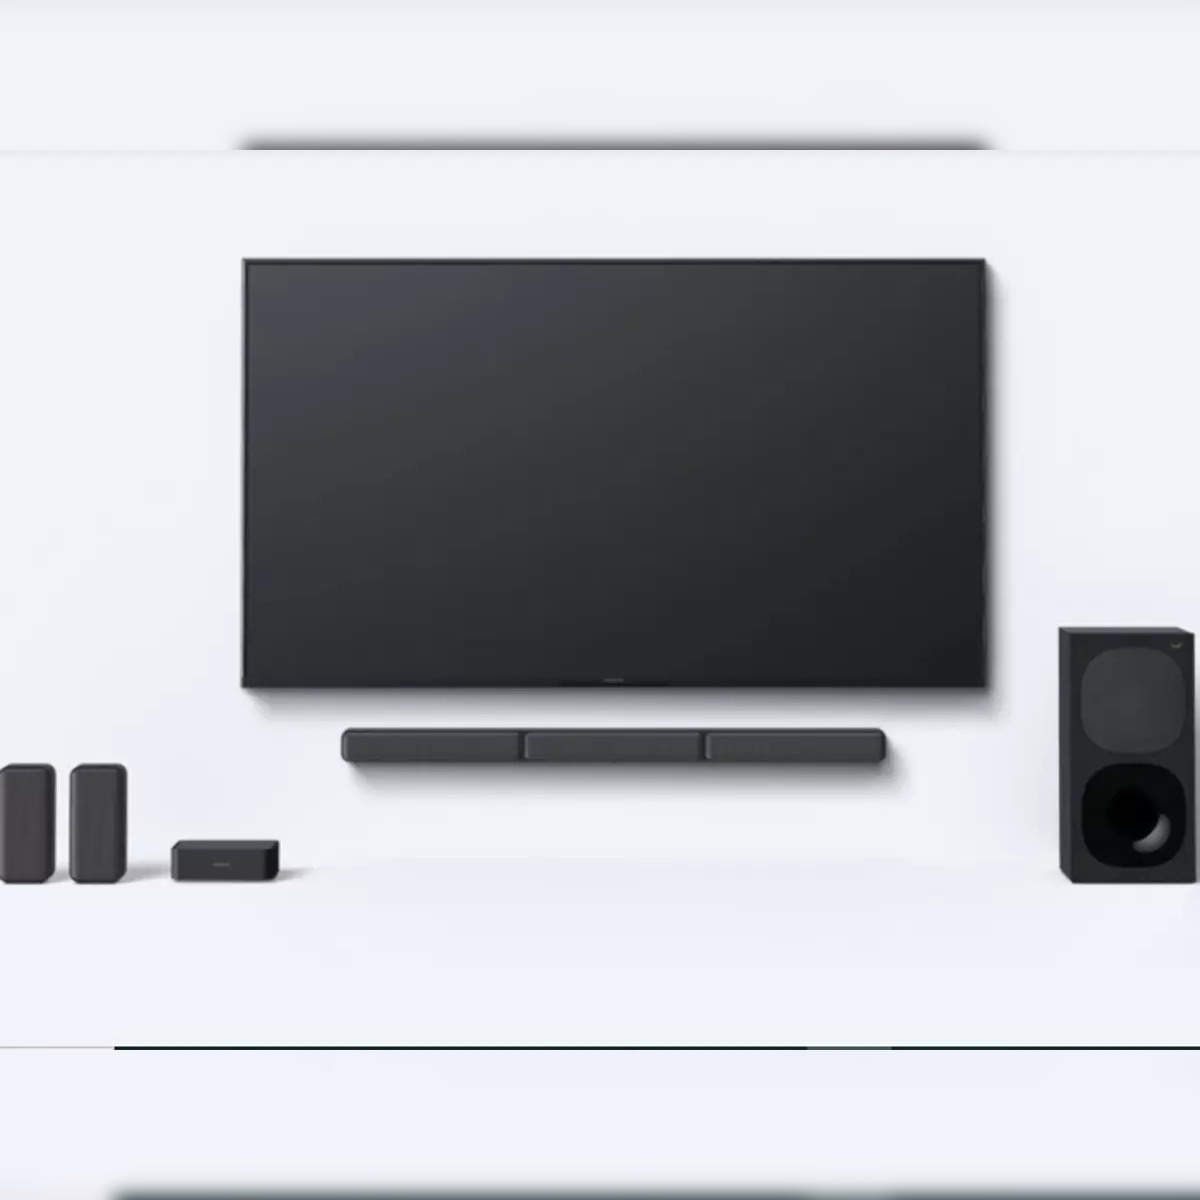 Sony HT-S40R soundbar home theatre Review : Sony fixed my biggest problem  with budget 5.1 setups and it works really well